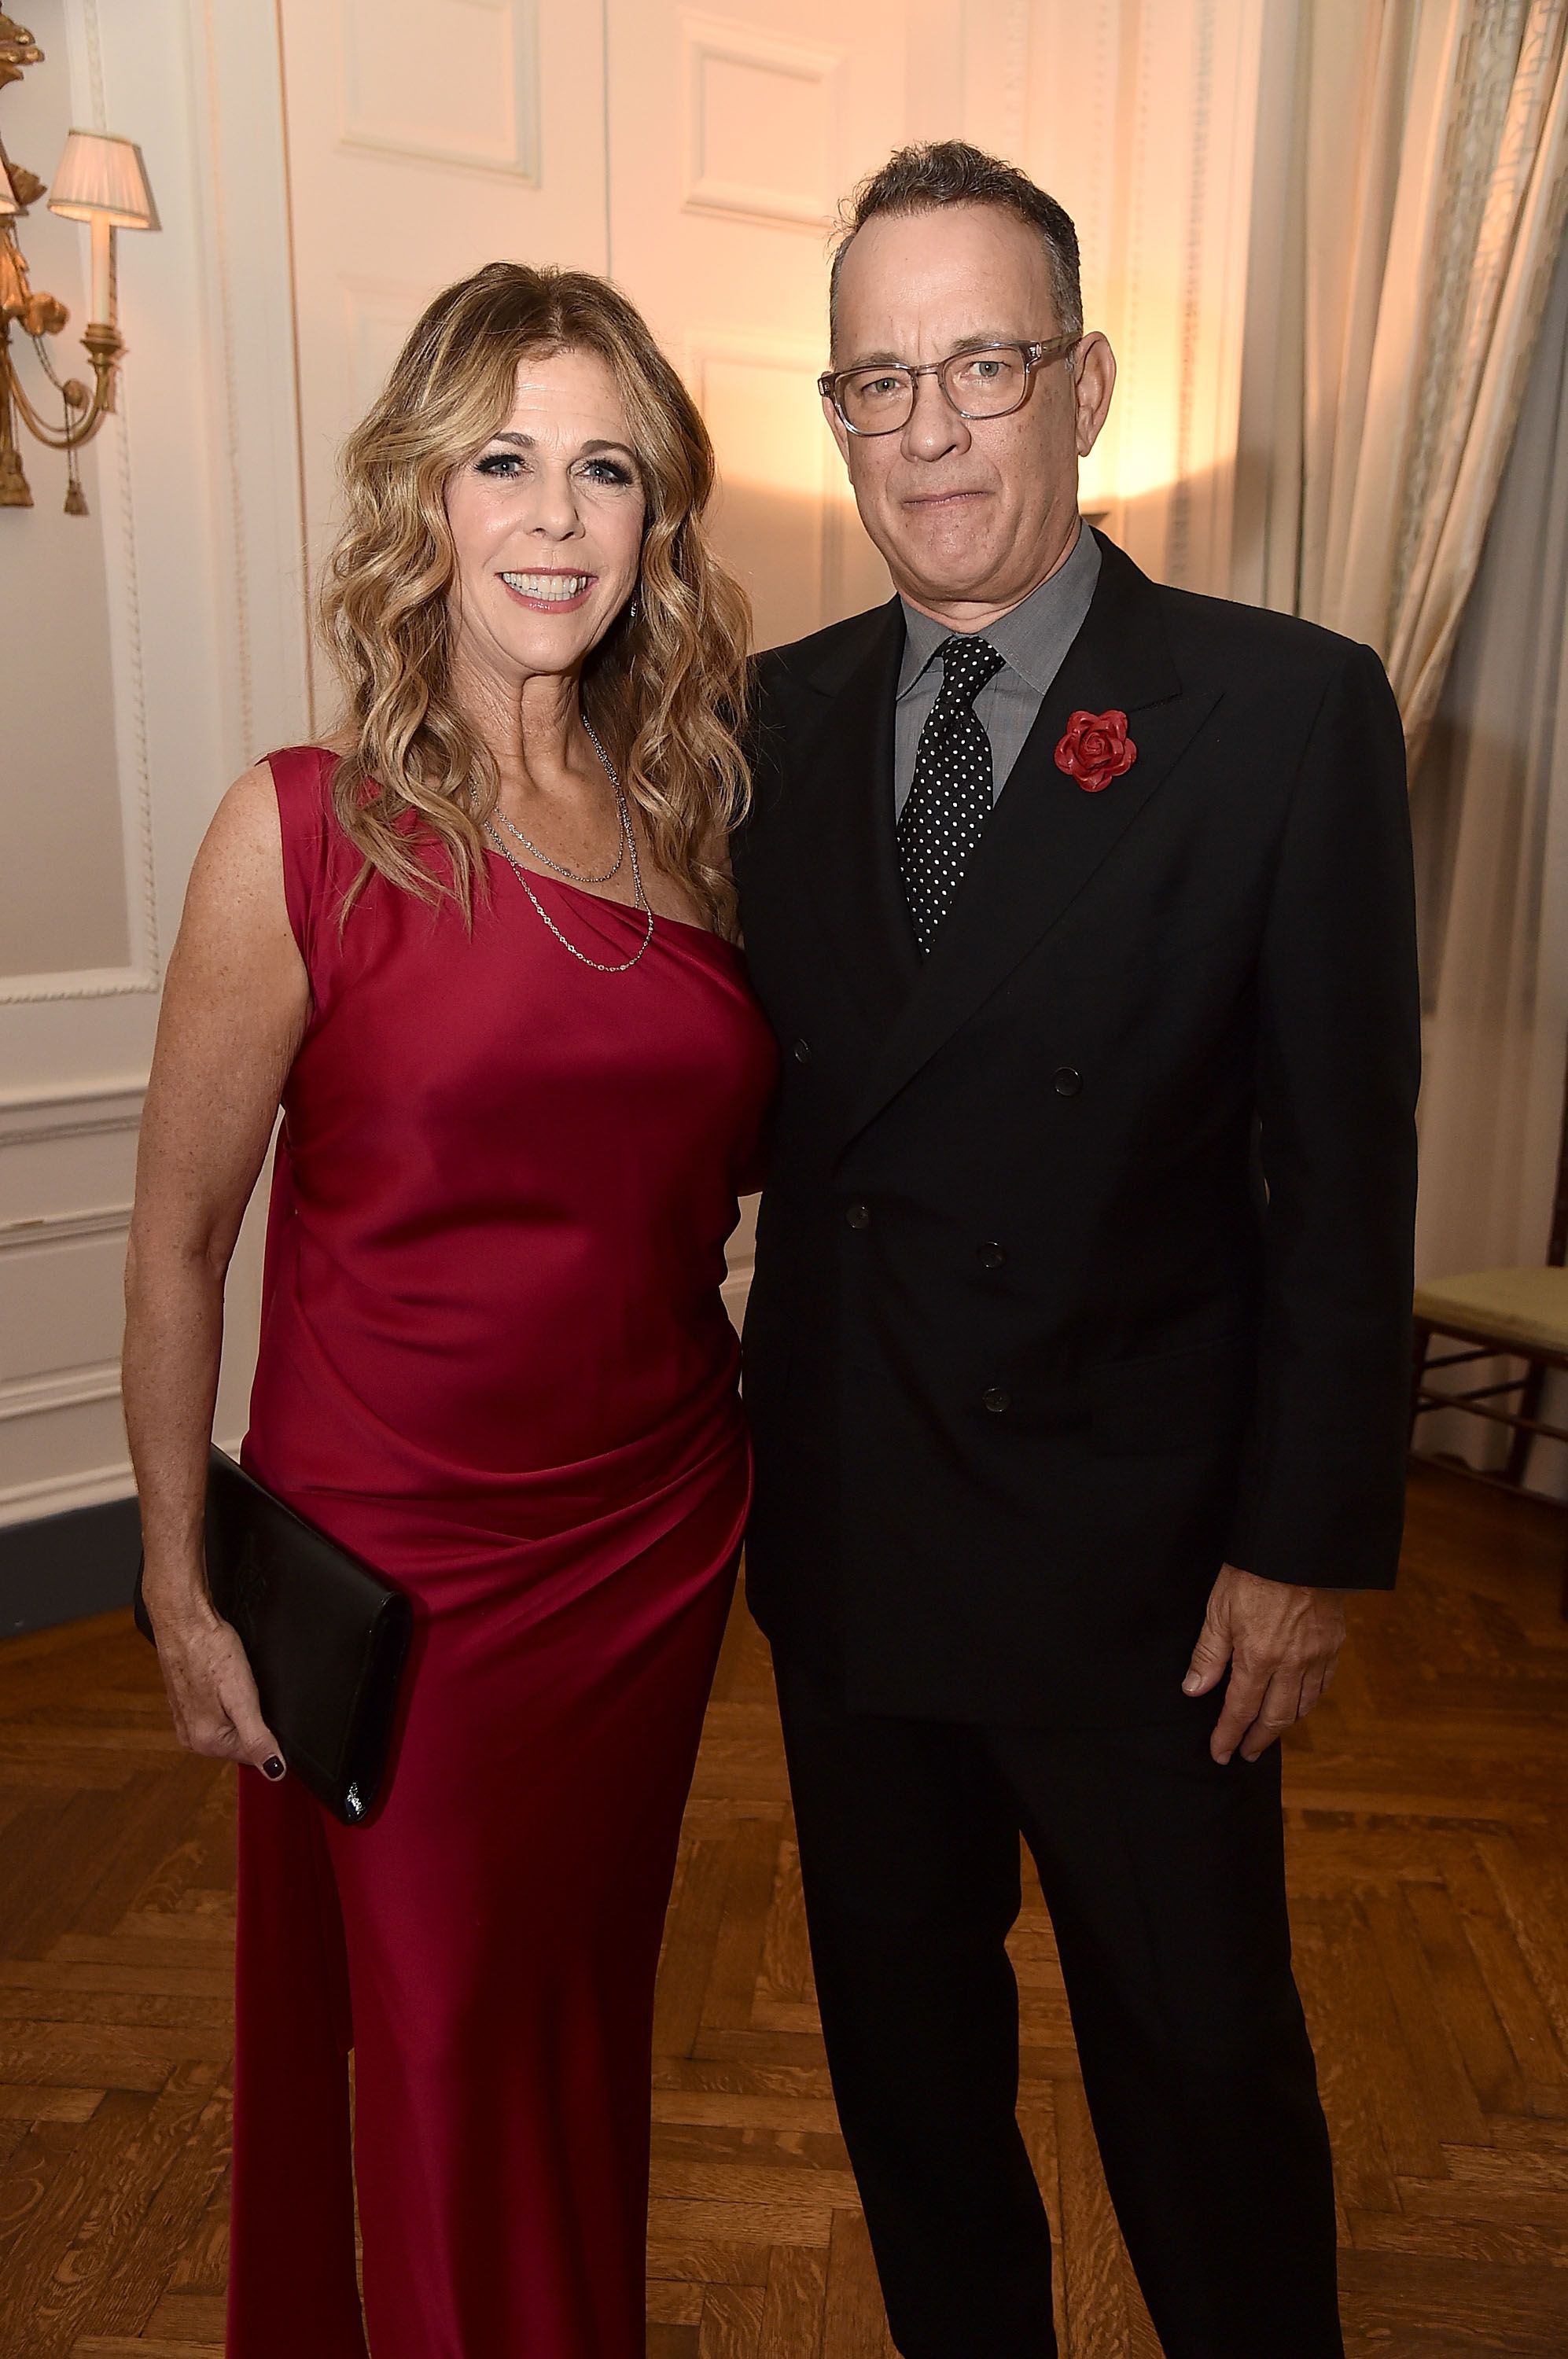 Rita Wilson and Tom Hanks at the American Friends of Blerancourt Dinner at Colony Club on November 9, 2018 | Photo: Getty Images